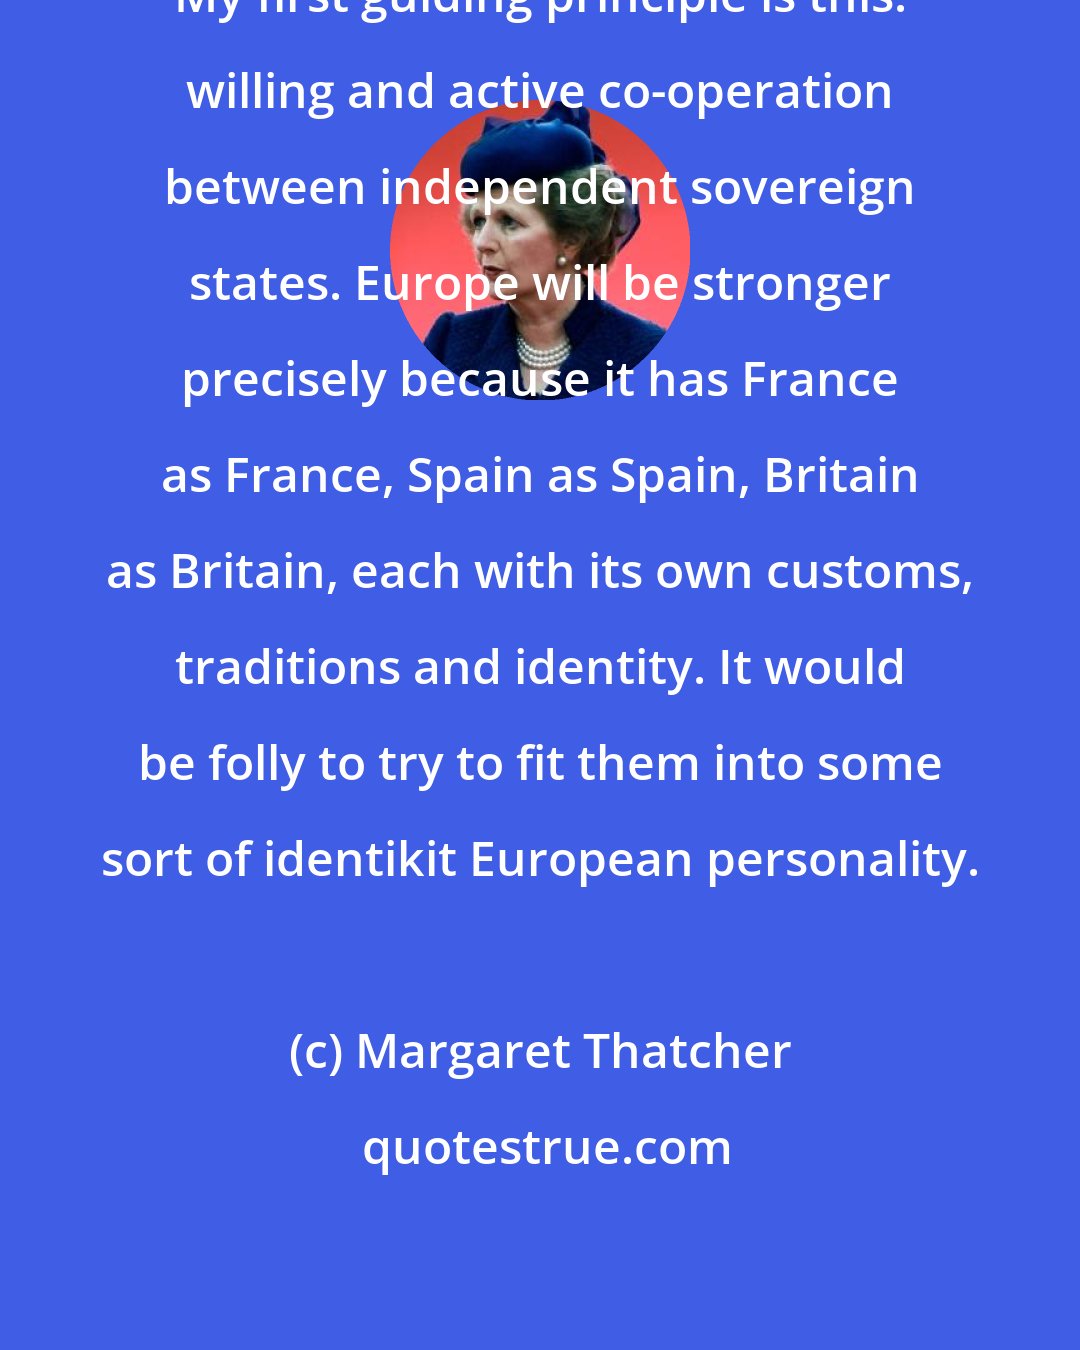 Margaret Thatcher: My first guiding principle is this: willing and active co-operation between independent sovereign states. Europe will be stronger precisely because it has France as France, Spain as Spain, Britain as Britain, each with its own customs, traditions and identity. It would be folly to try to fit them into some sort of identikit European personality.